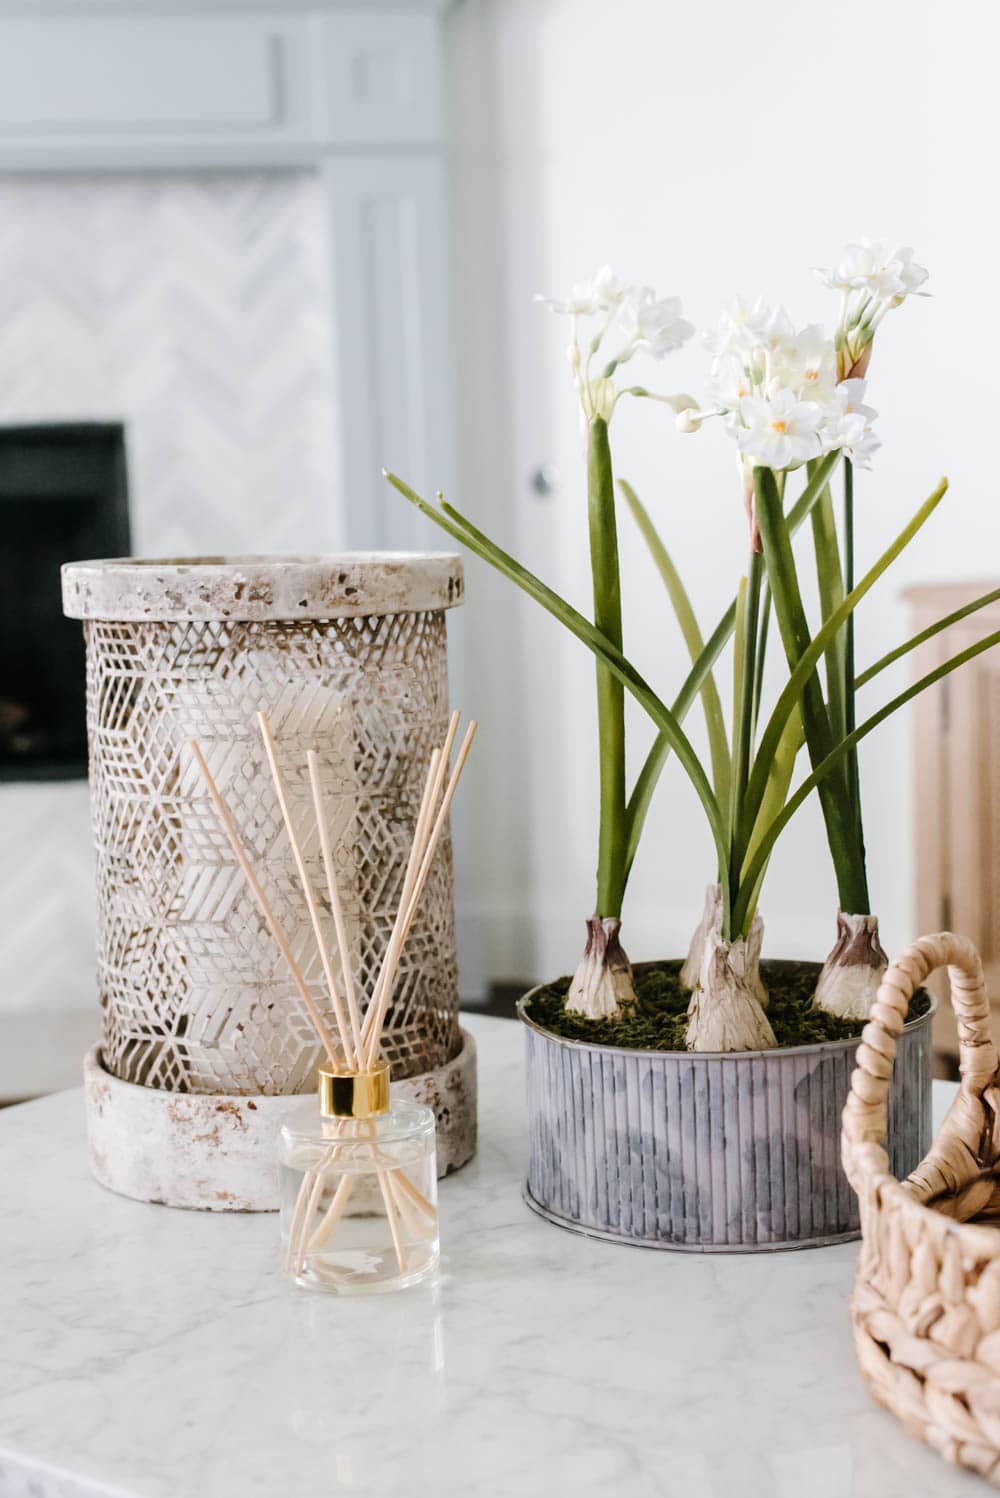 Tips to get a fresh curated look for summer effortlessly. #ABlissfulNest #summerhomedecor #summerstyle